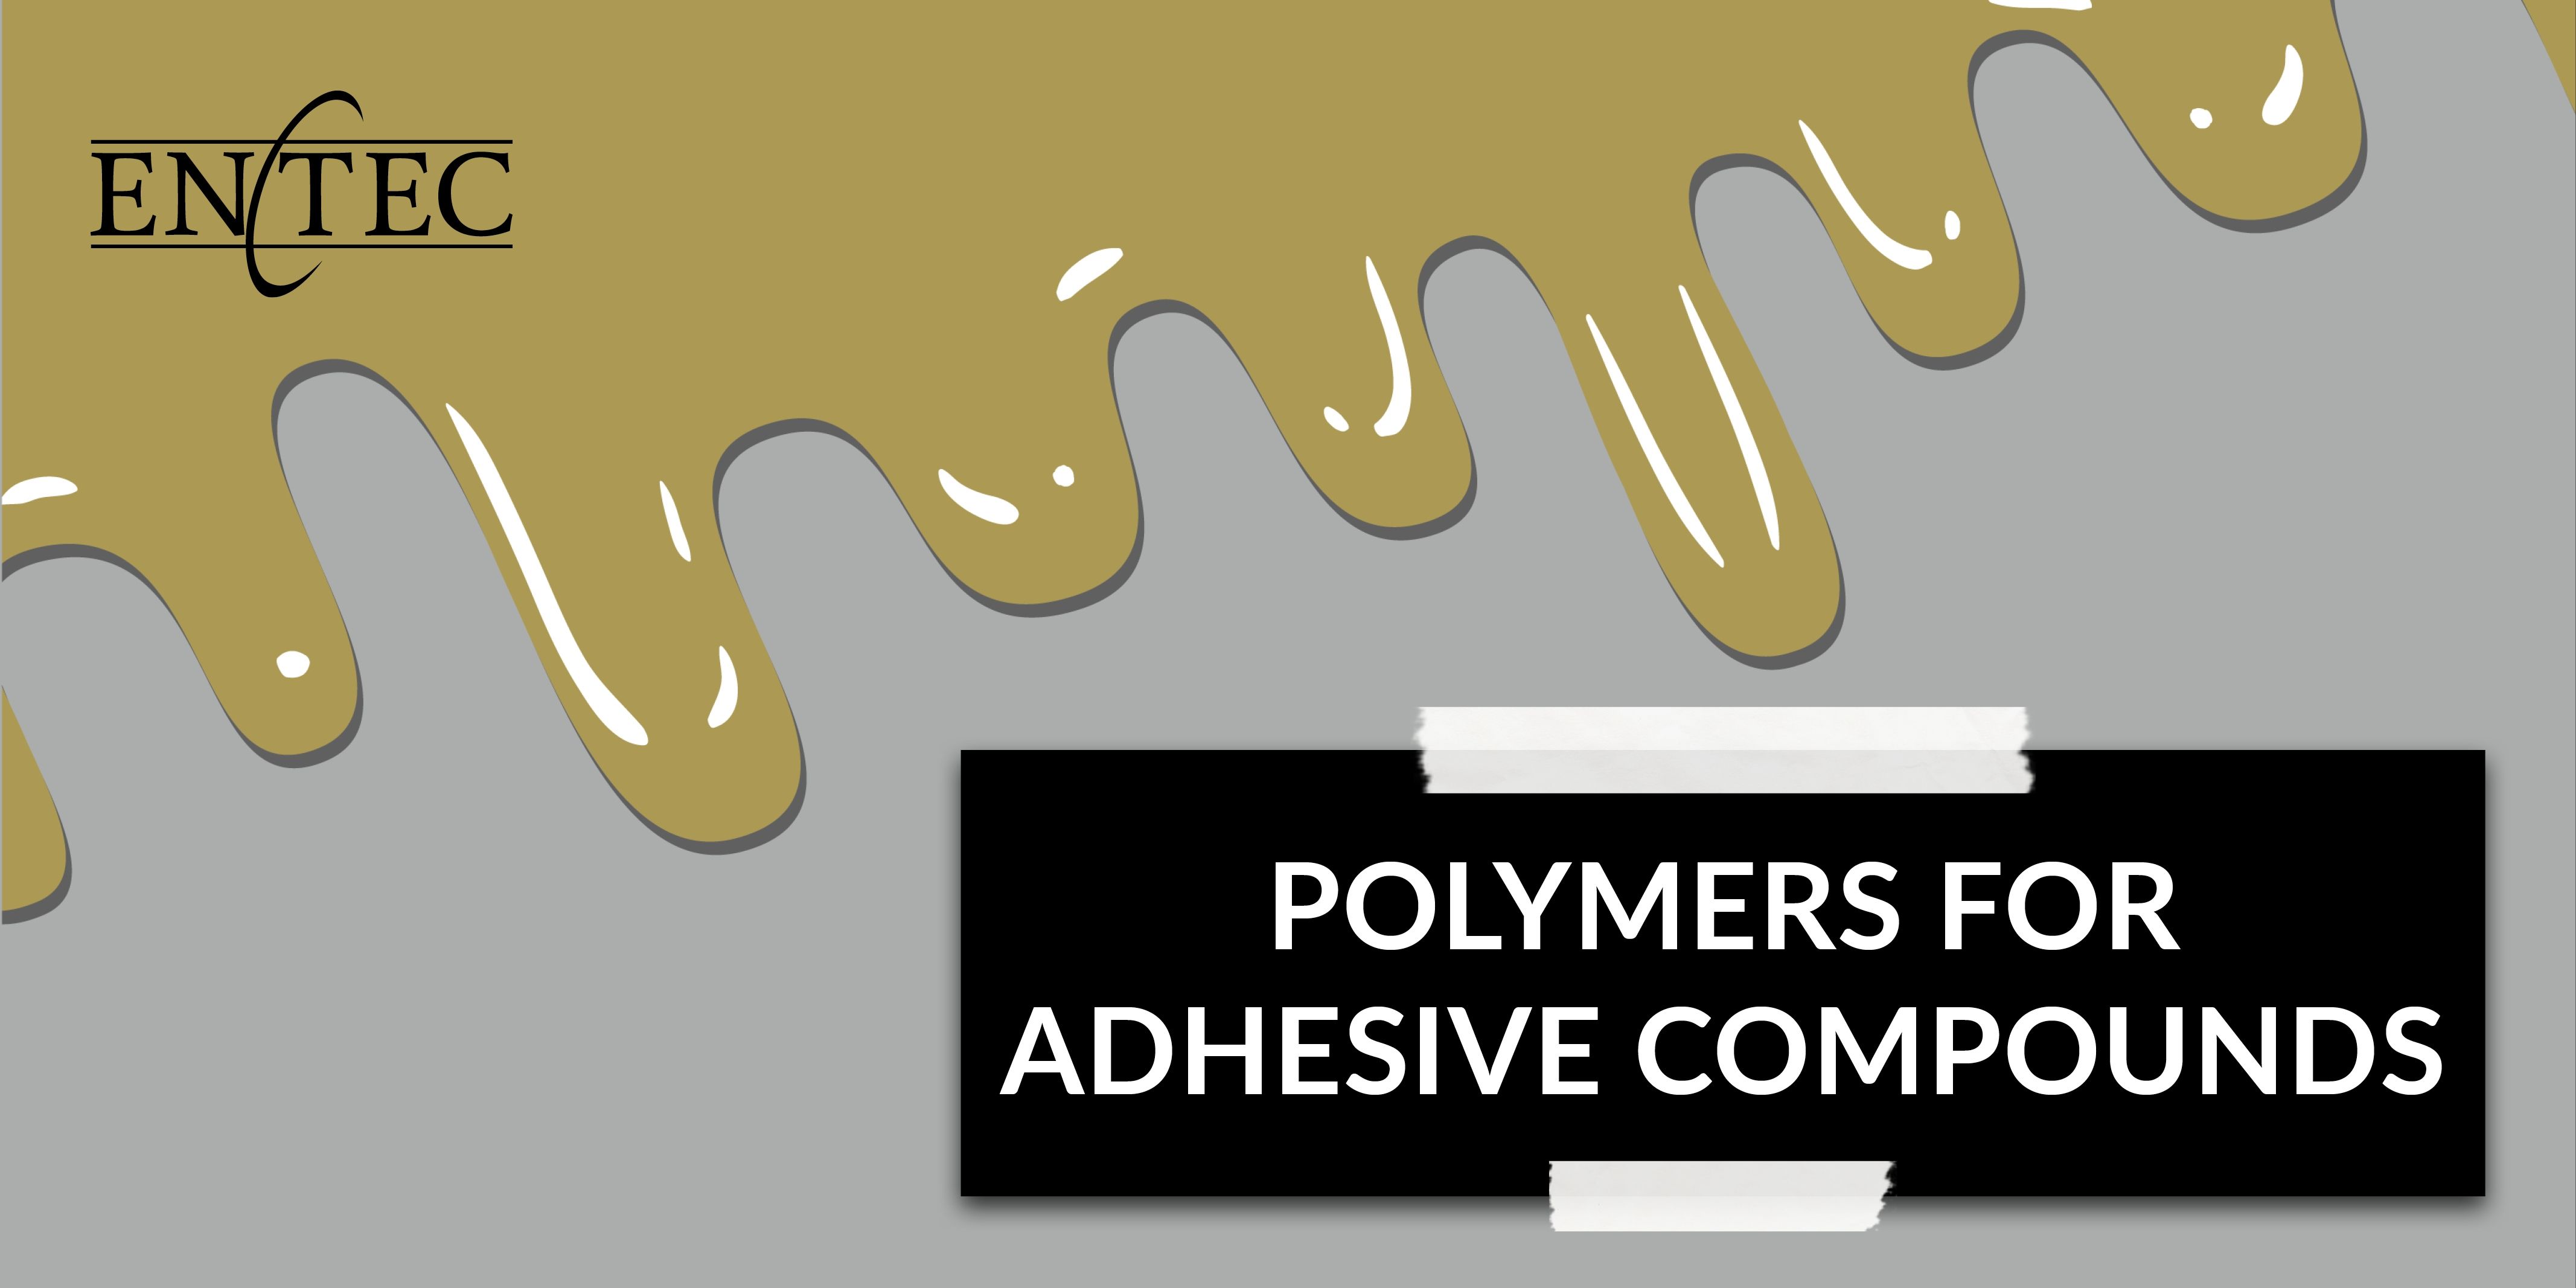 Polymers for Adhesive Compounds Social Media Post